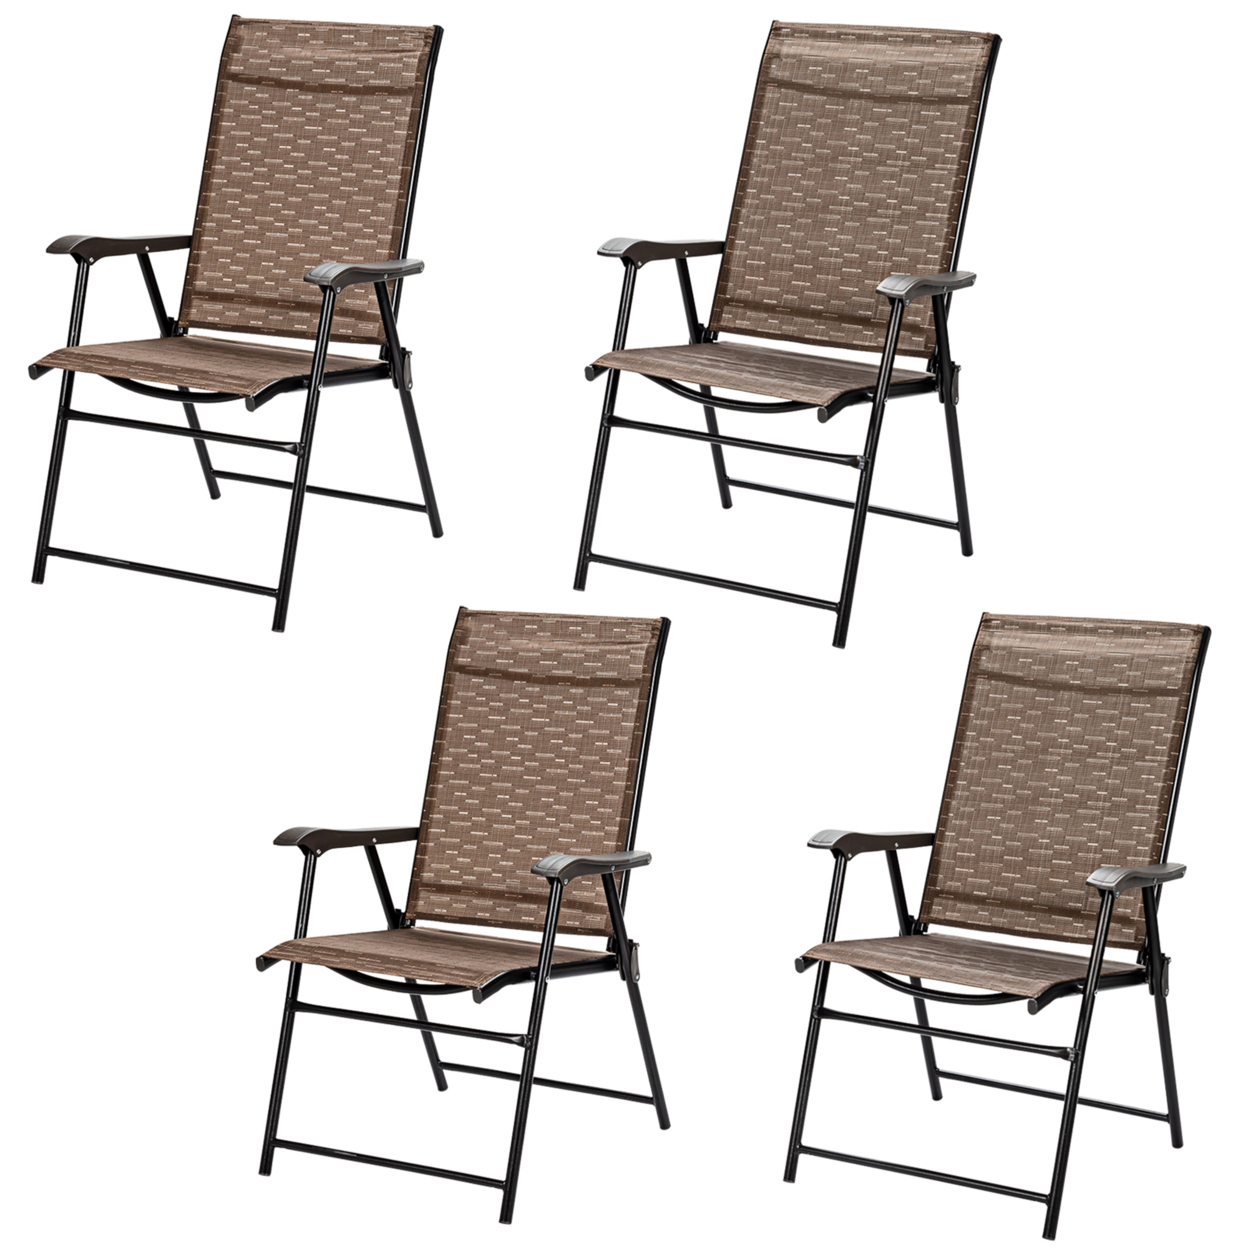 Set Of 4 Folding Portable Patio Chairs Yard Outdoor W/ Armrests & Backrest